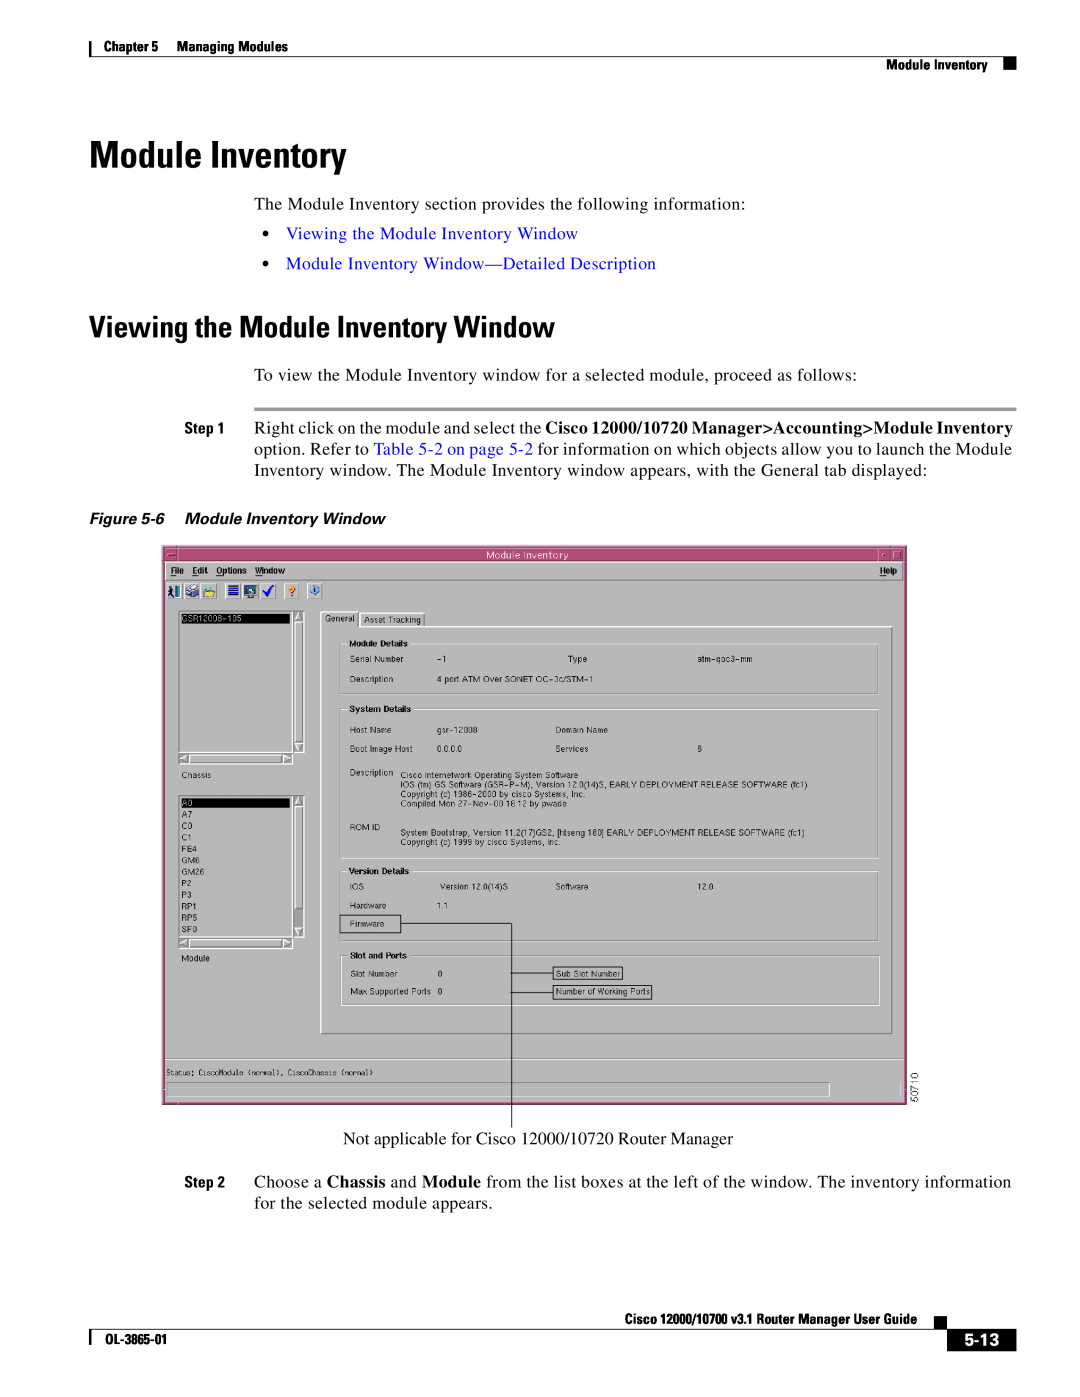 Cisco Systems 10700 manual Viewing the Module Inventory Window, Module Inventory Window-Detailed Description, 5-13 